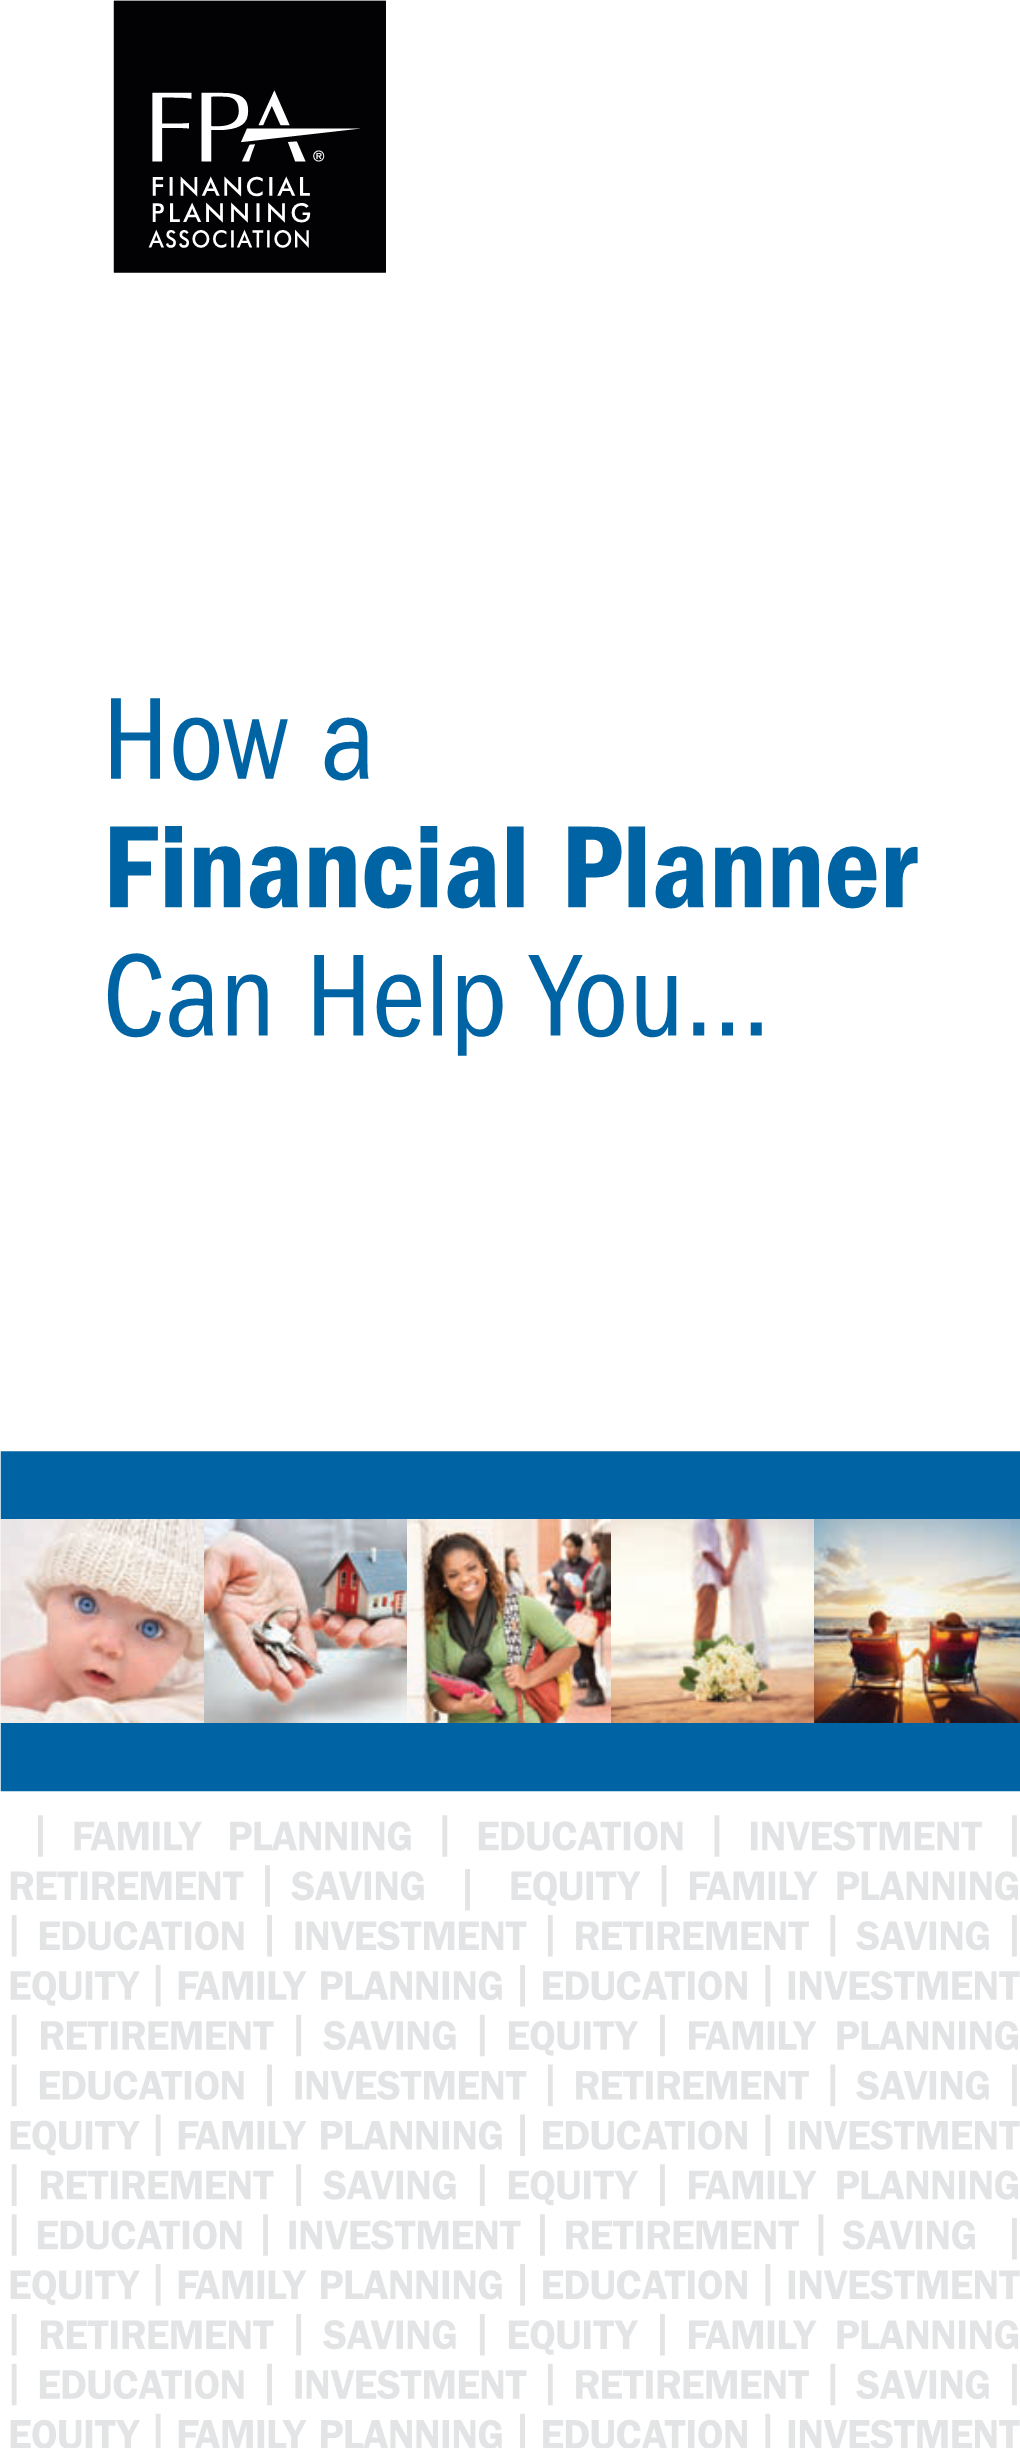 How a Financial Planner Can Help You…